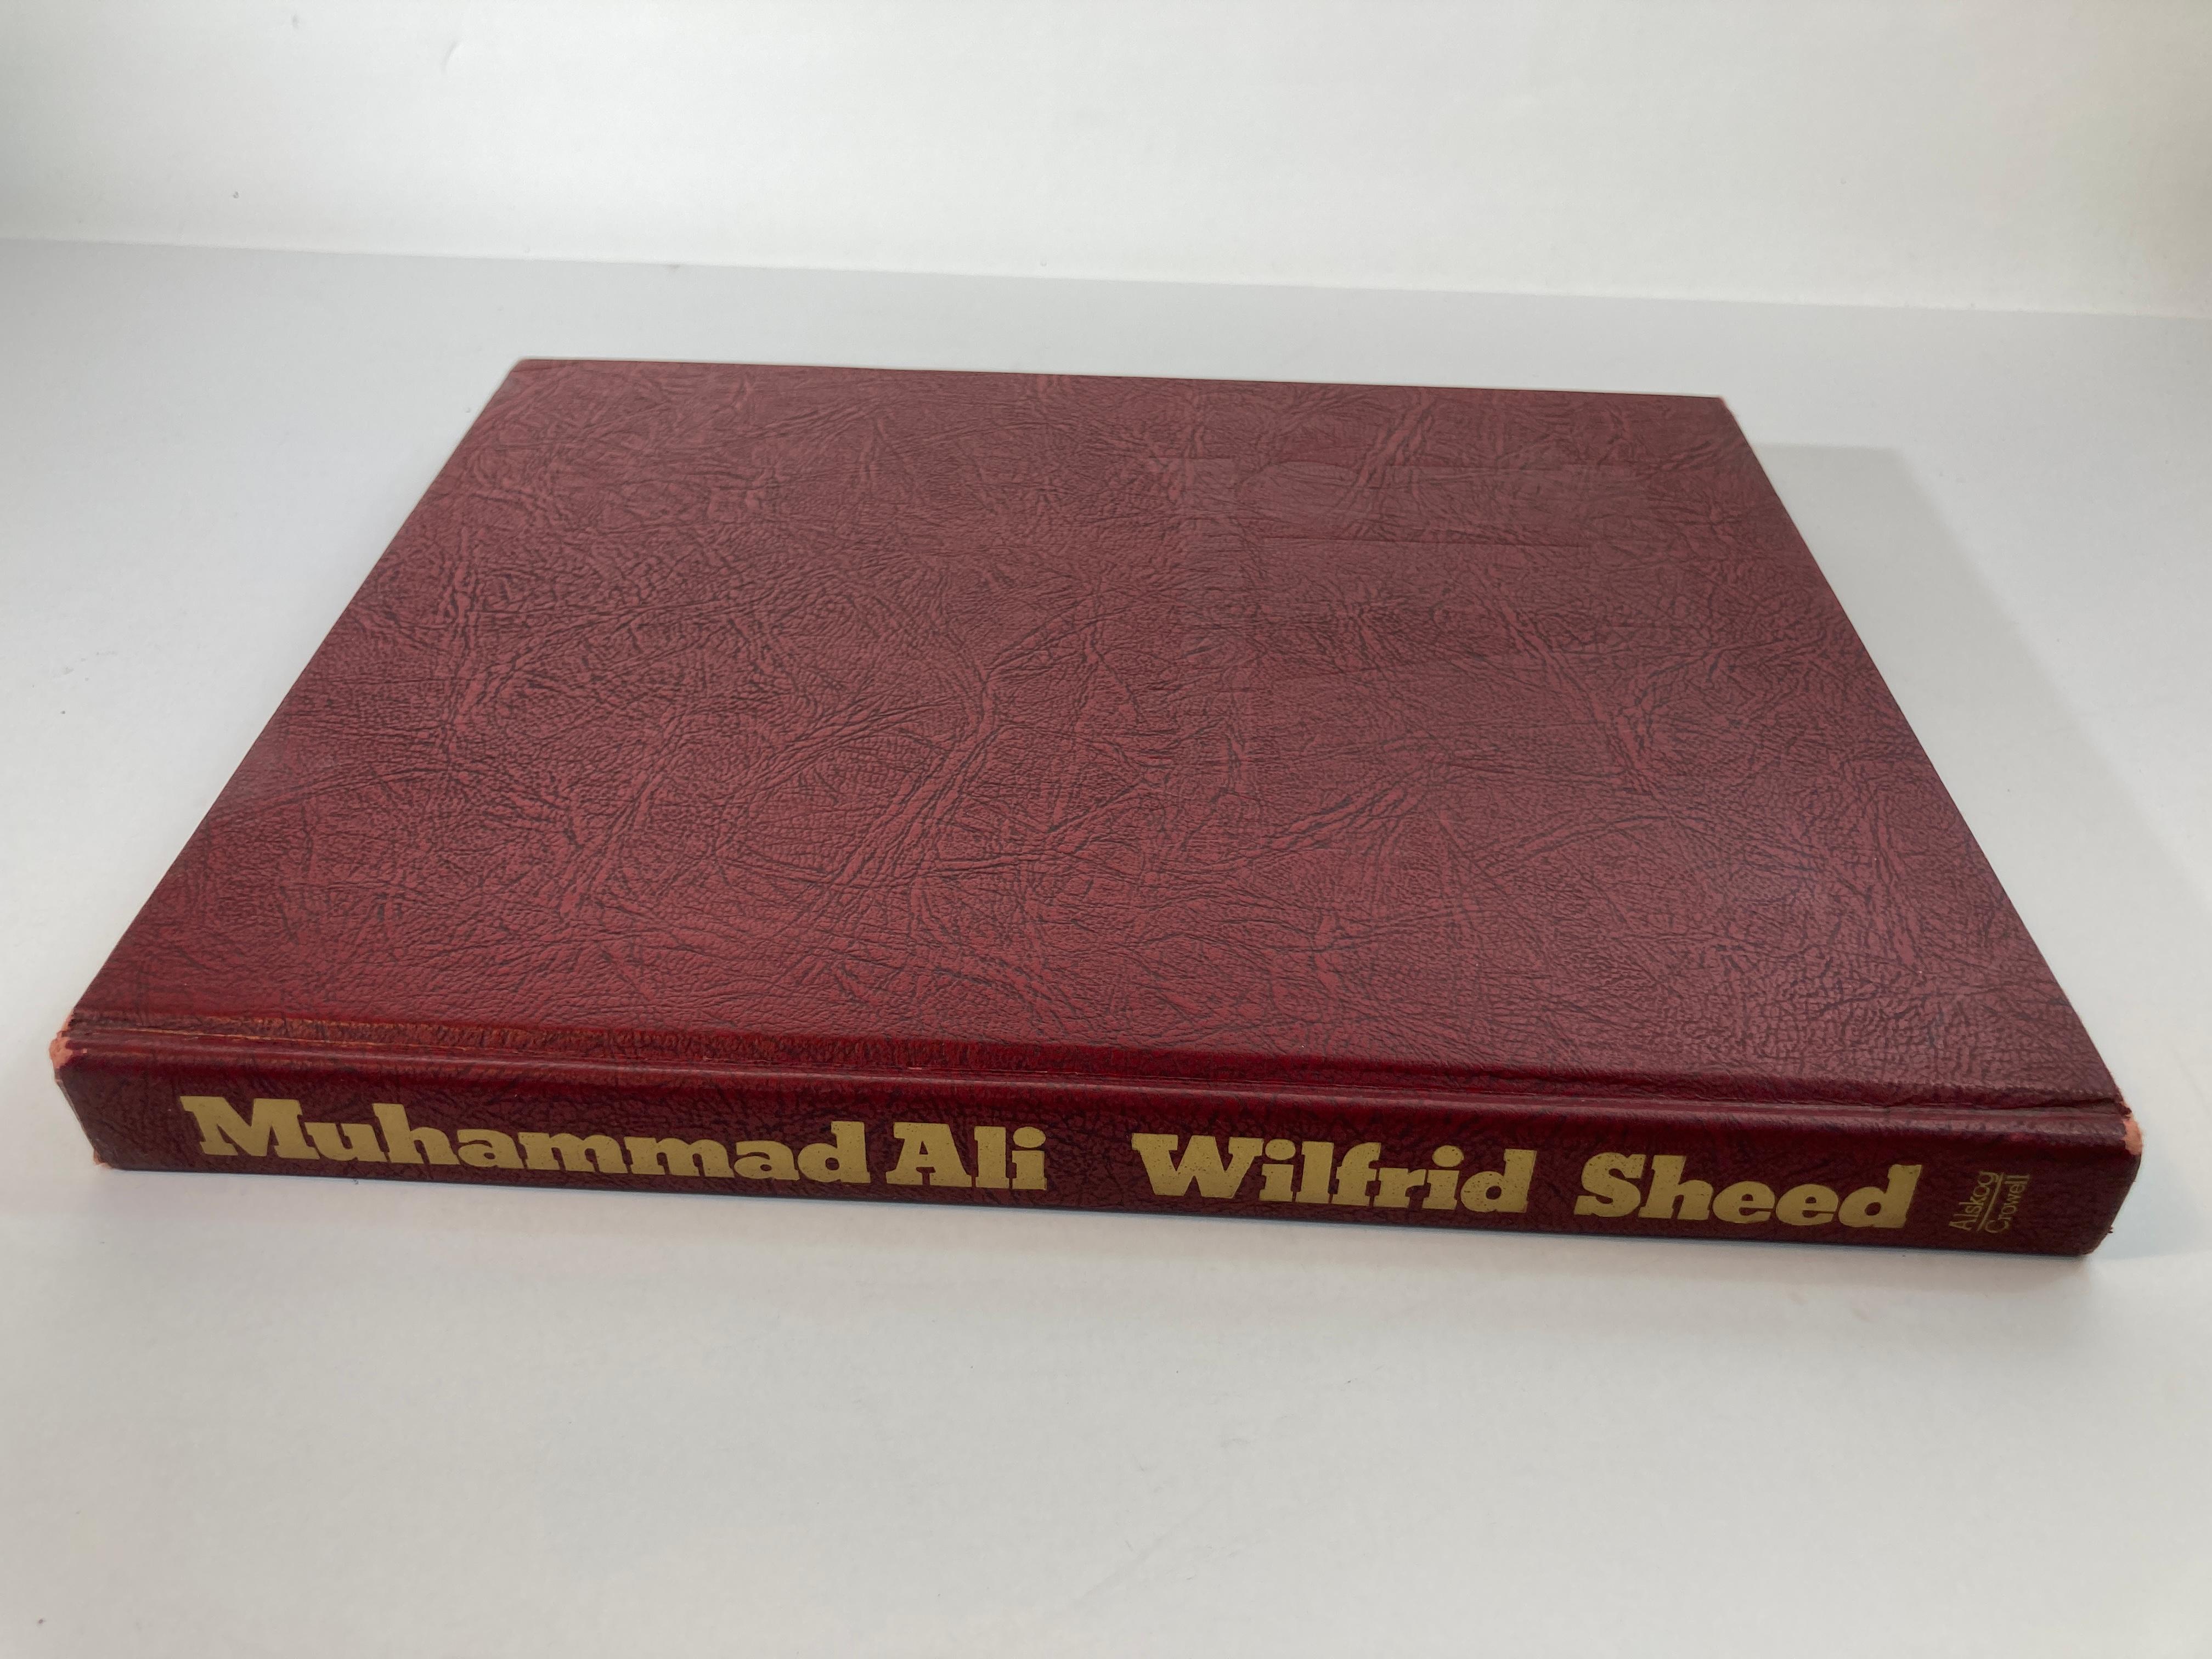 Muhammad Ali by Sheed, Wilfrid Book 1975 1st Ed. For Sale 2